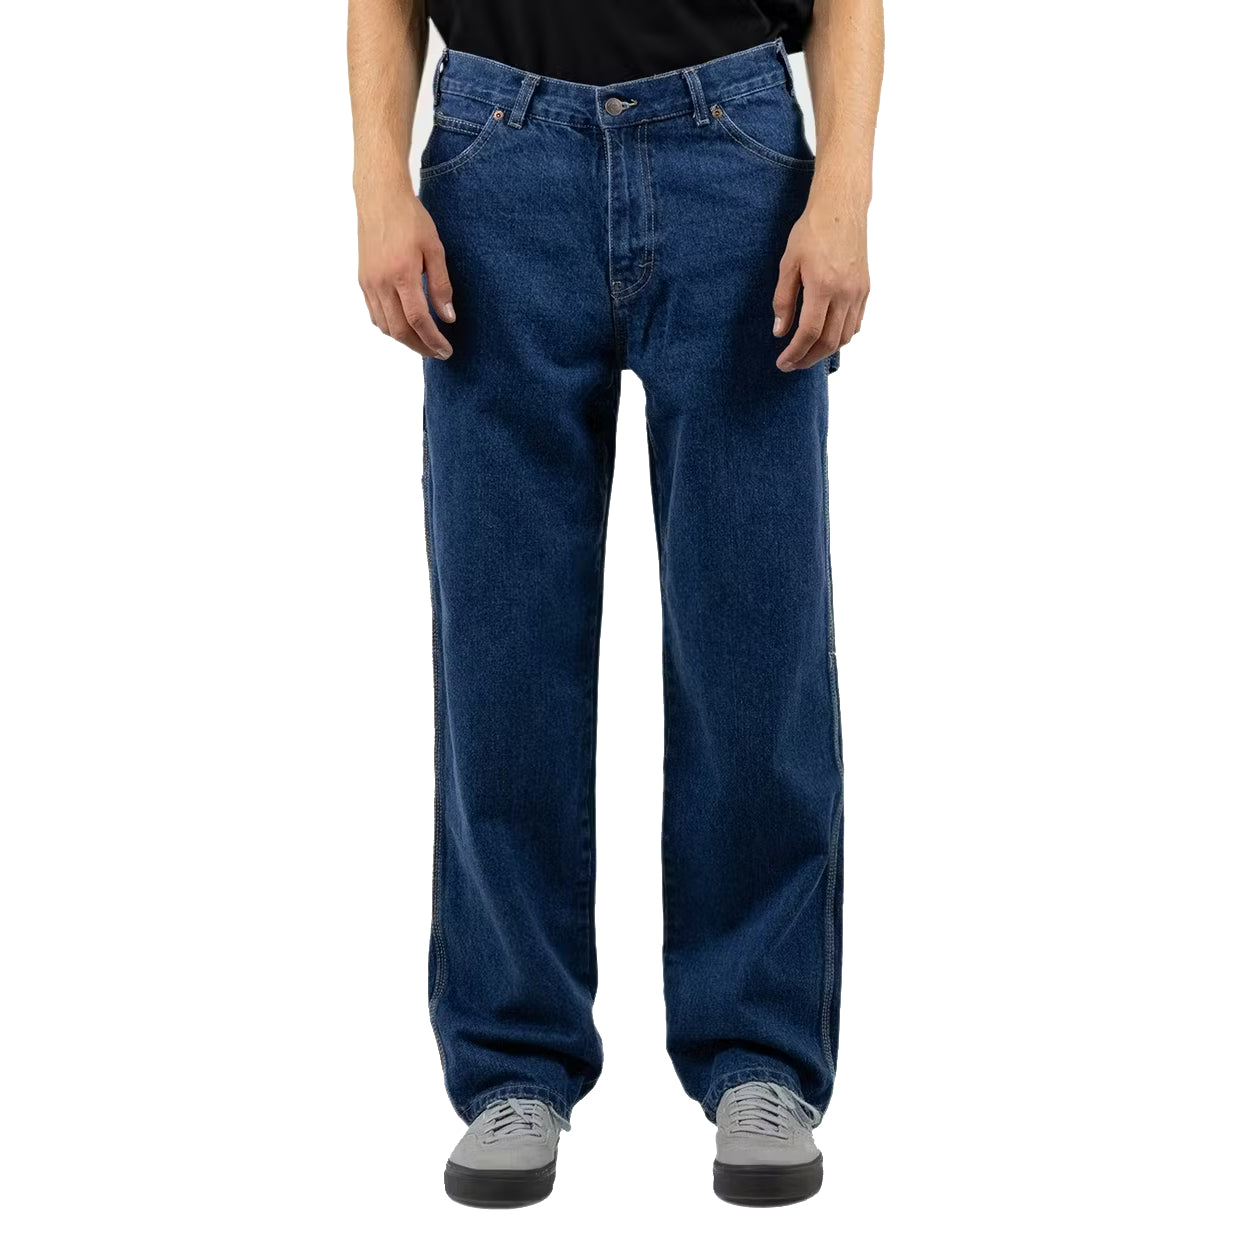 DICKIES - 1993 RELAXED FIT CARPENTER DENIM JEAN - STONE WASHED INDIGO BLUE